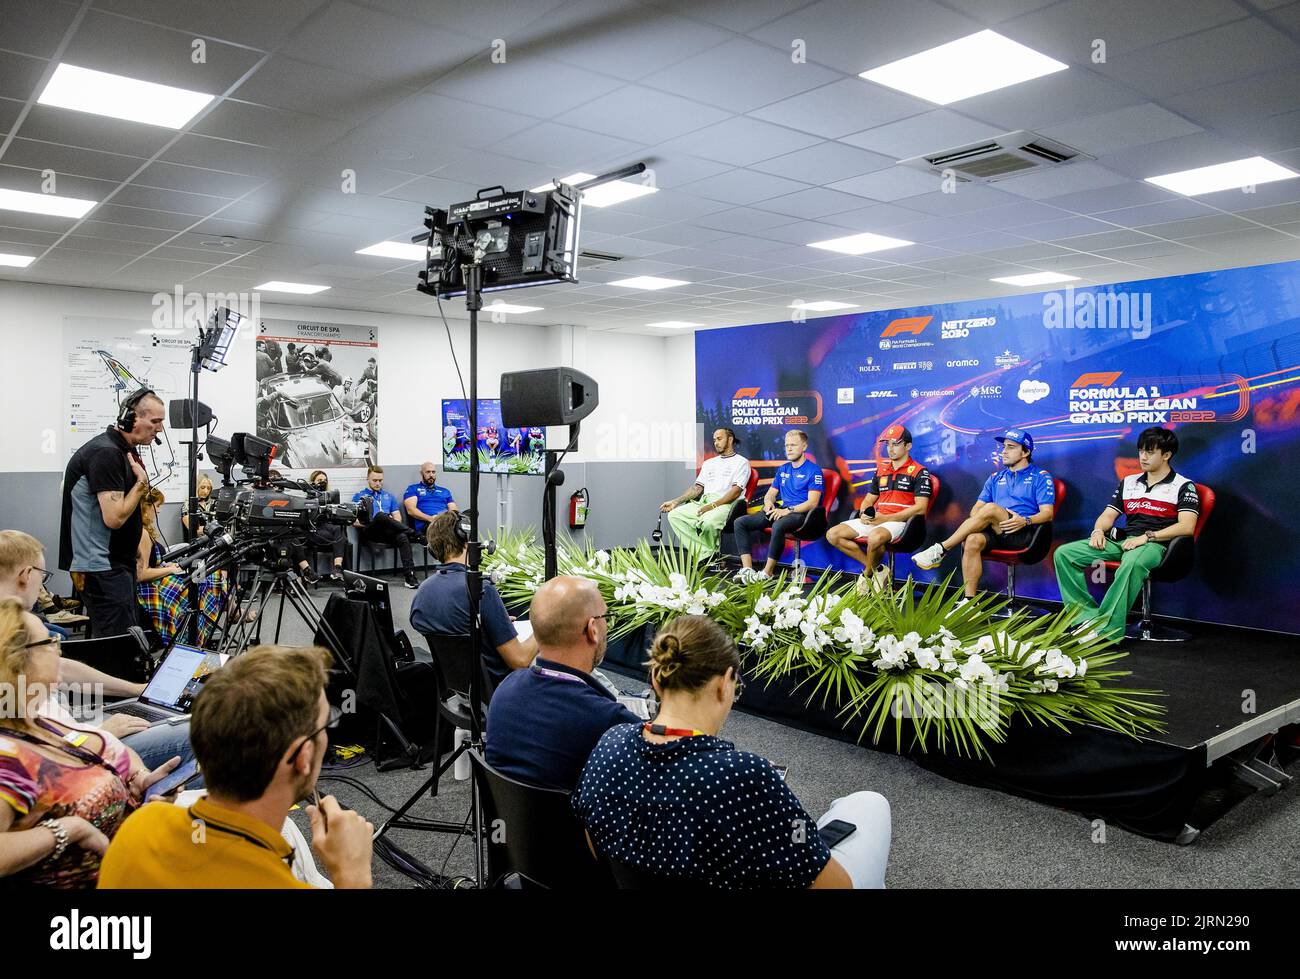 2022-08-25 15:18:10 SPA - Lewis Hamilton (Mercedes), Kevin Magnussen (Haas F1 Team), Charles Leclerc (Ferrari), Fernando Alonso (Alpine) and Zhou Guanyu (Alfa Romeo) (VLNR) during a press conference at the Spa-Francrochamps race track leading up to the Belgian Grand Prix. ANP SEM VAN DER WAL netherlands out - belgium out Stock Photo